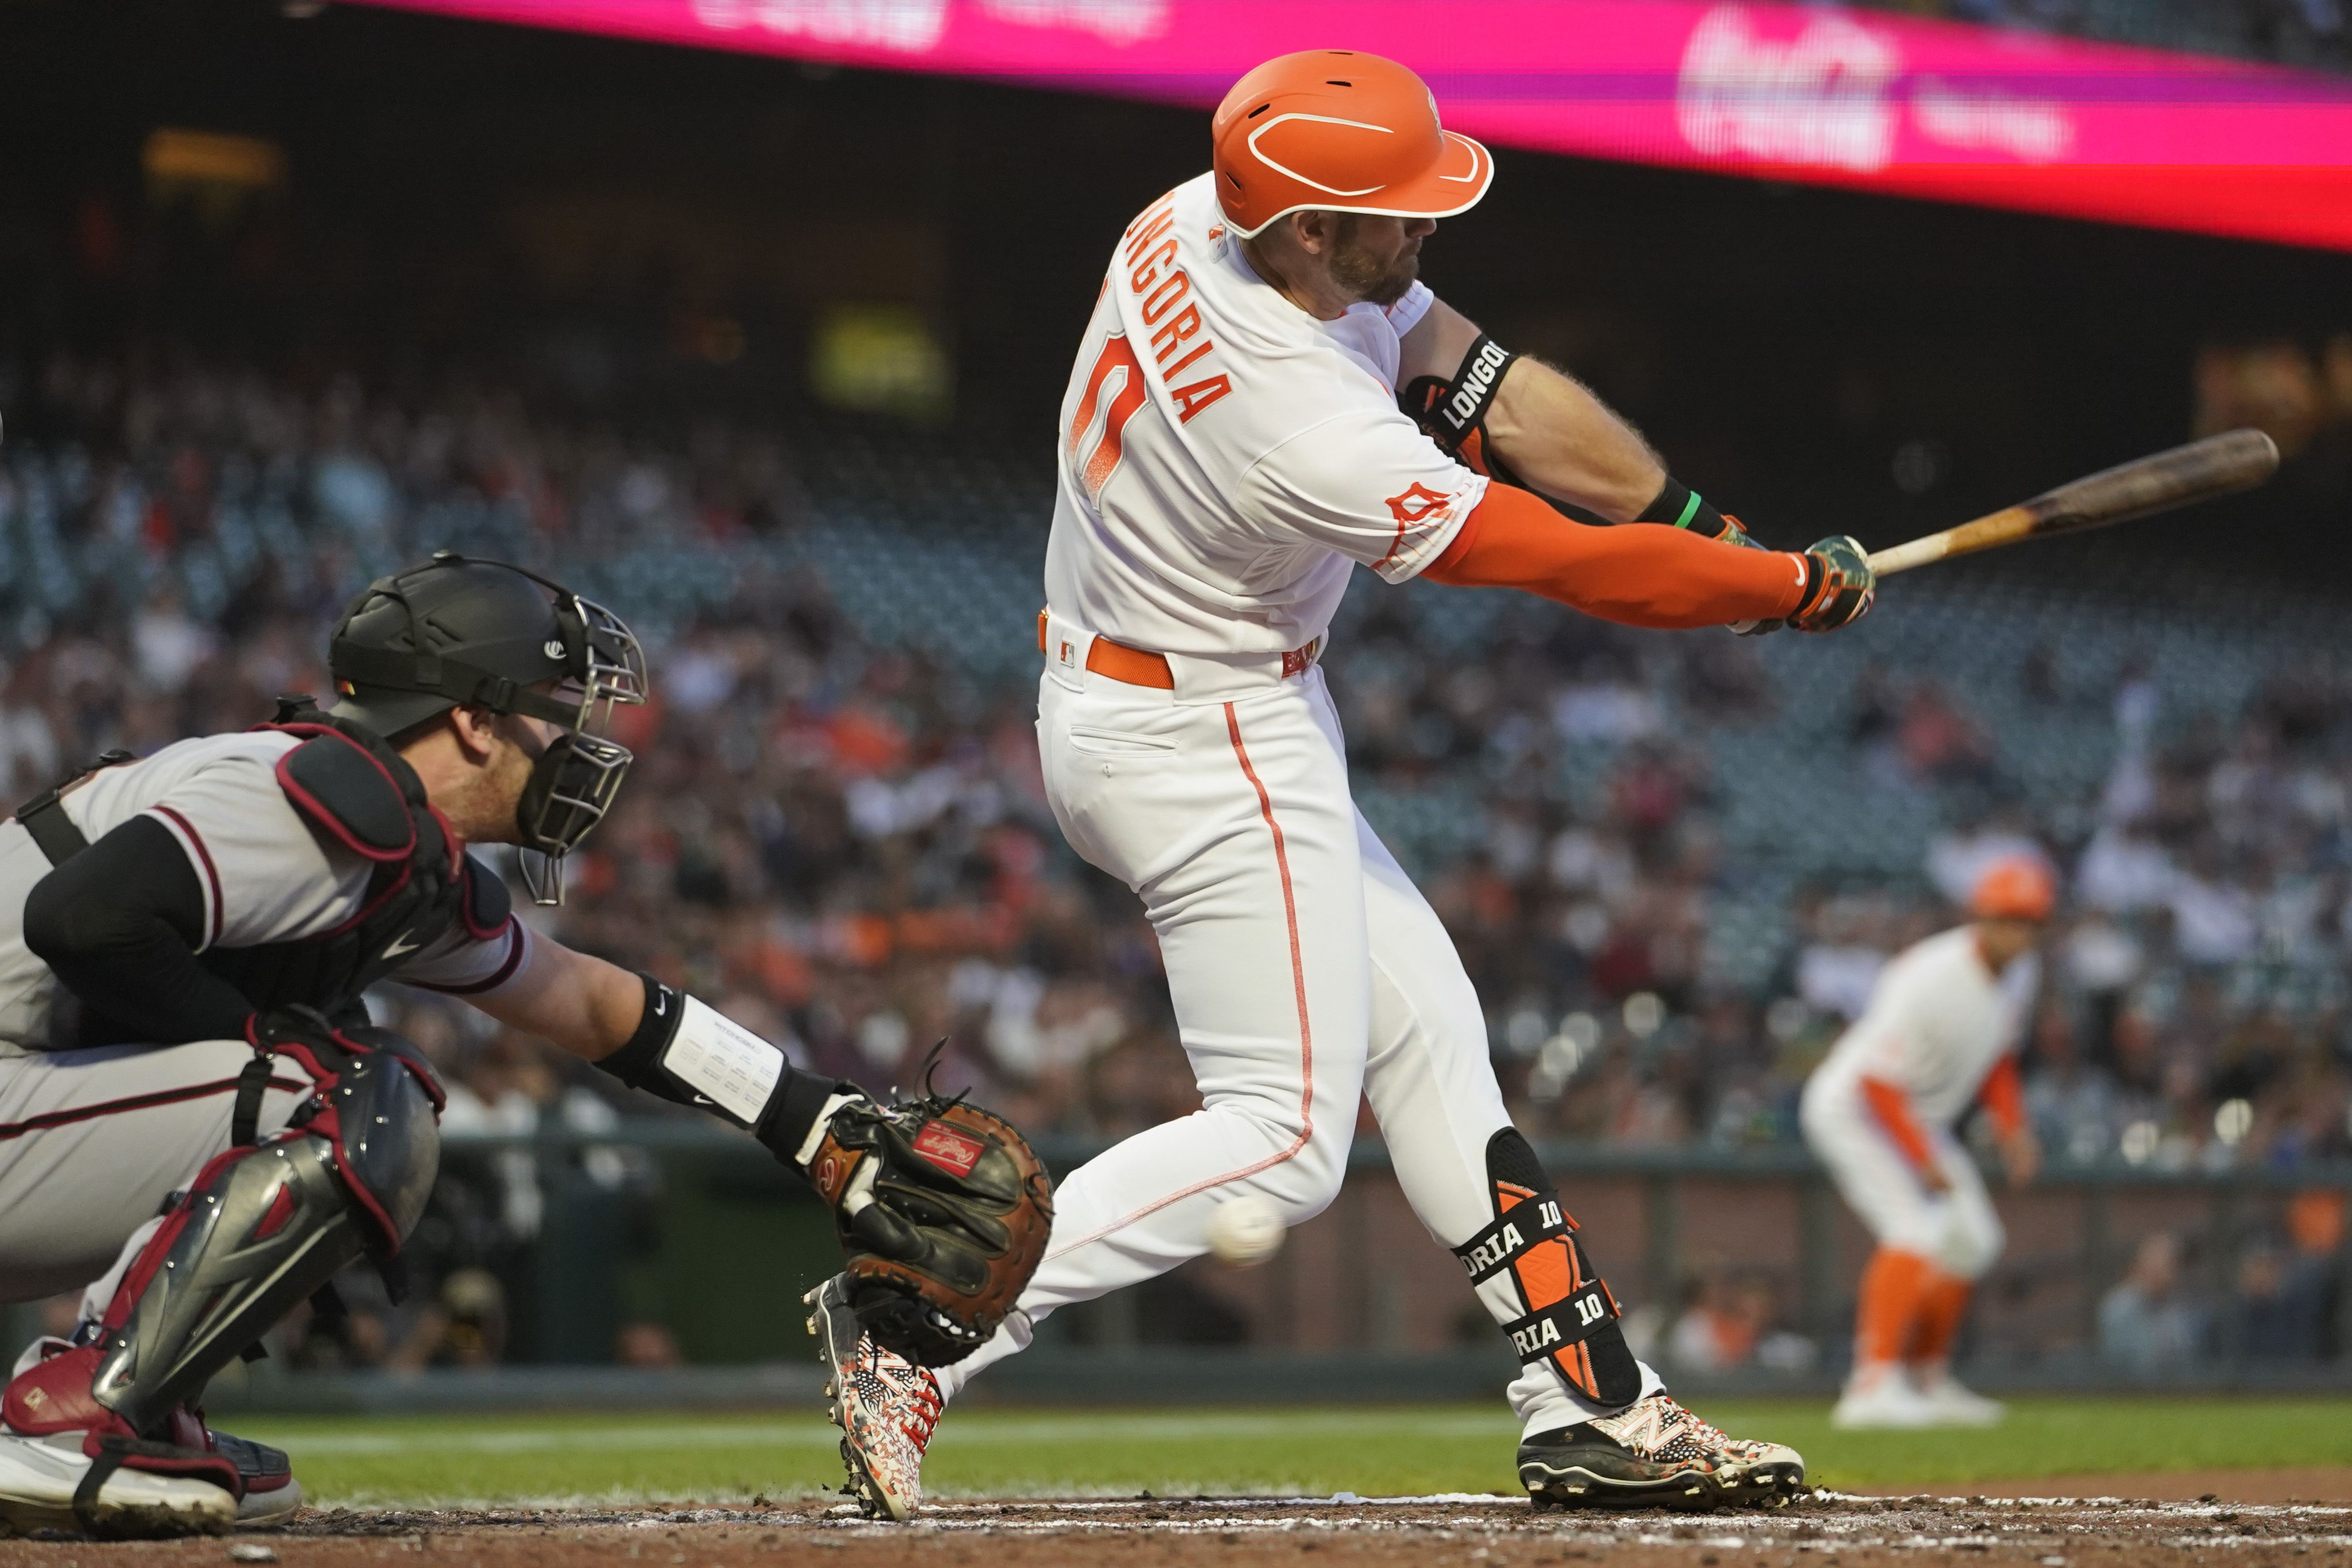 Crawford's HR with 2 outs in 9th lifts Giants past D-backs – KXAN